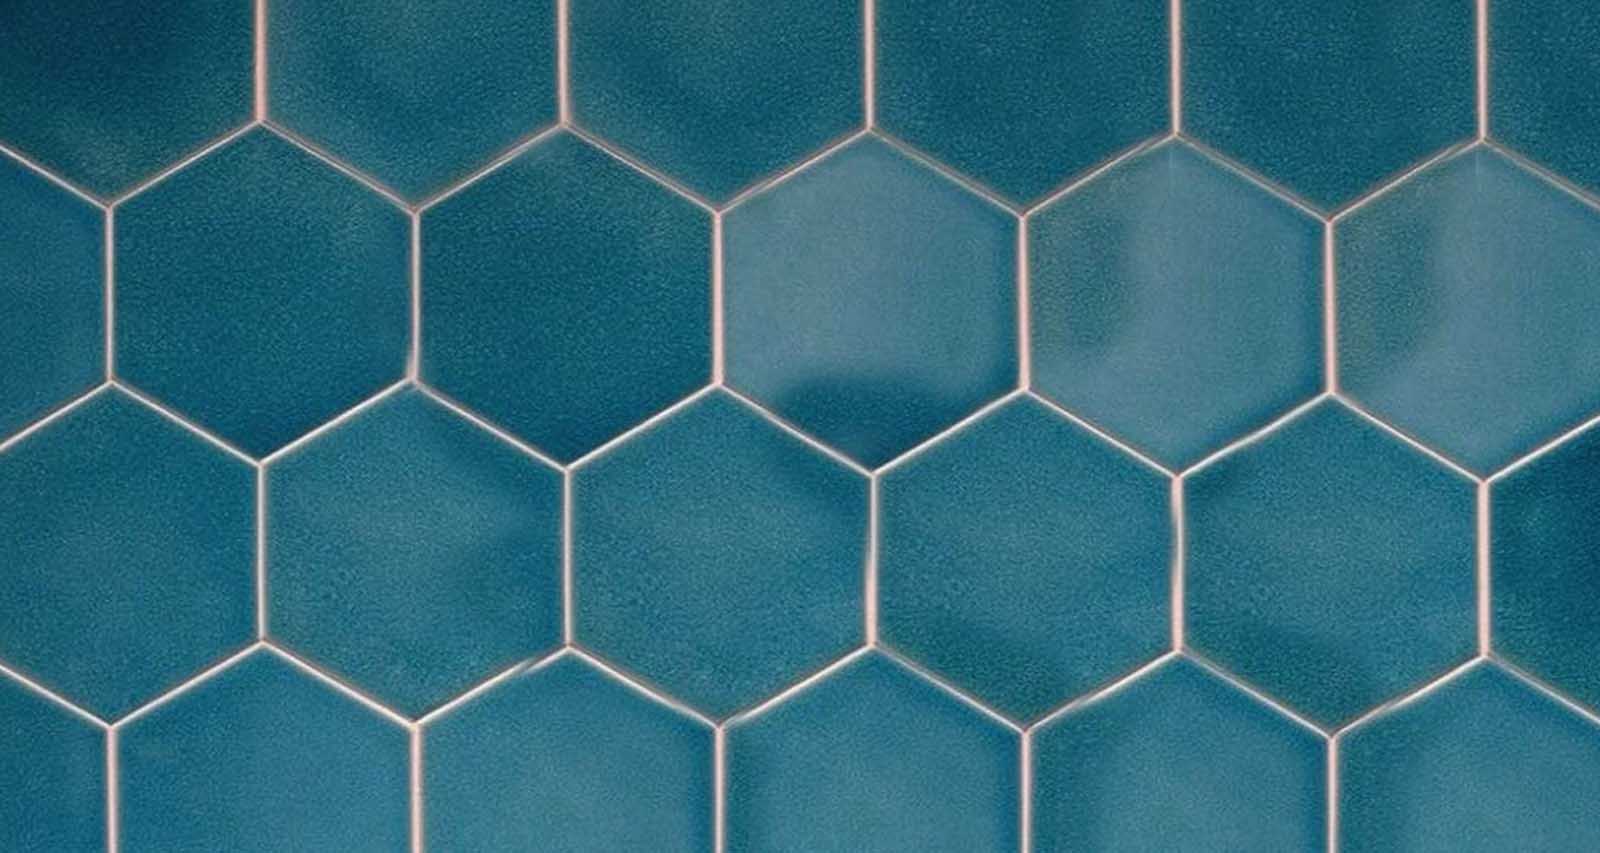 Hexagon Sky Blue Ceramic and Porcelain Wall and Floor Tiles Design Price in Pakistan